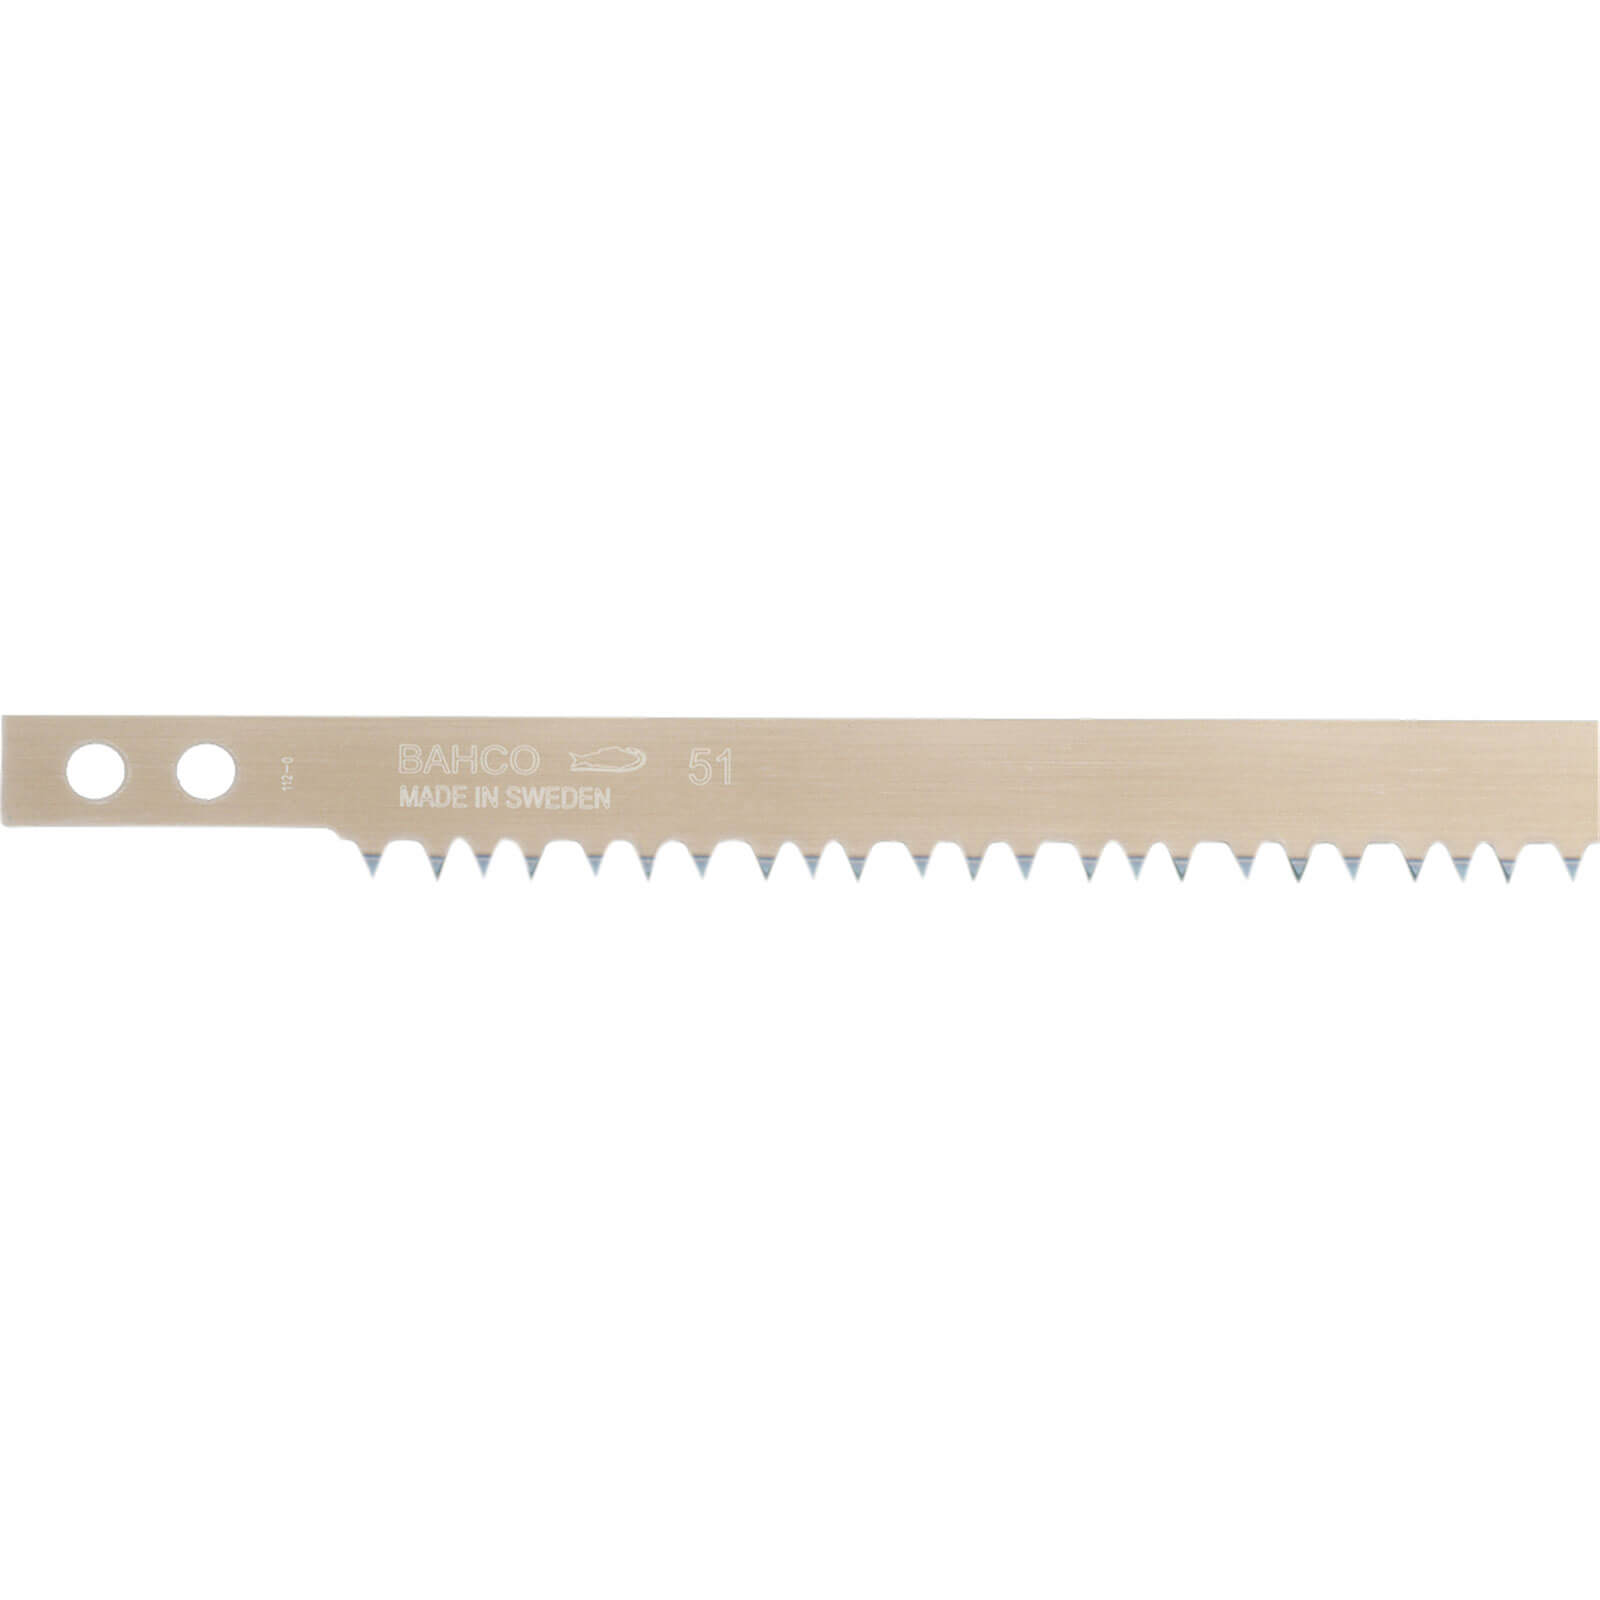 Image of Bahco Hard Point Bow Saw Blade for Green and Dry Wood 12" / 300mm